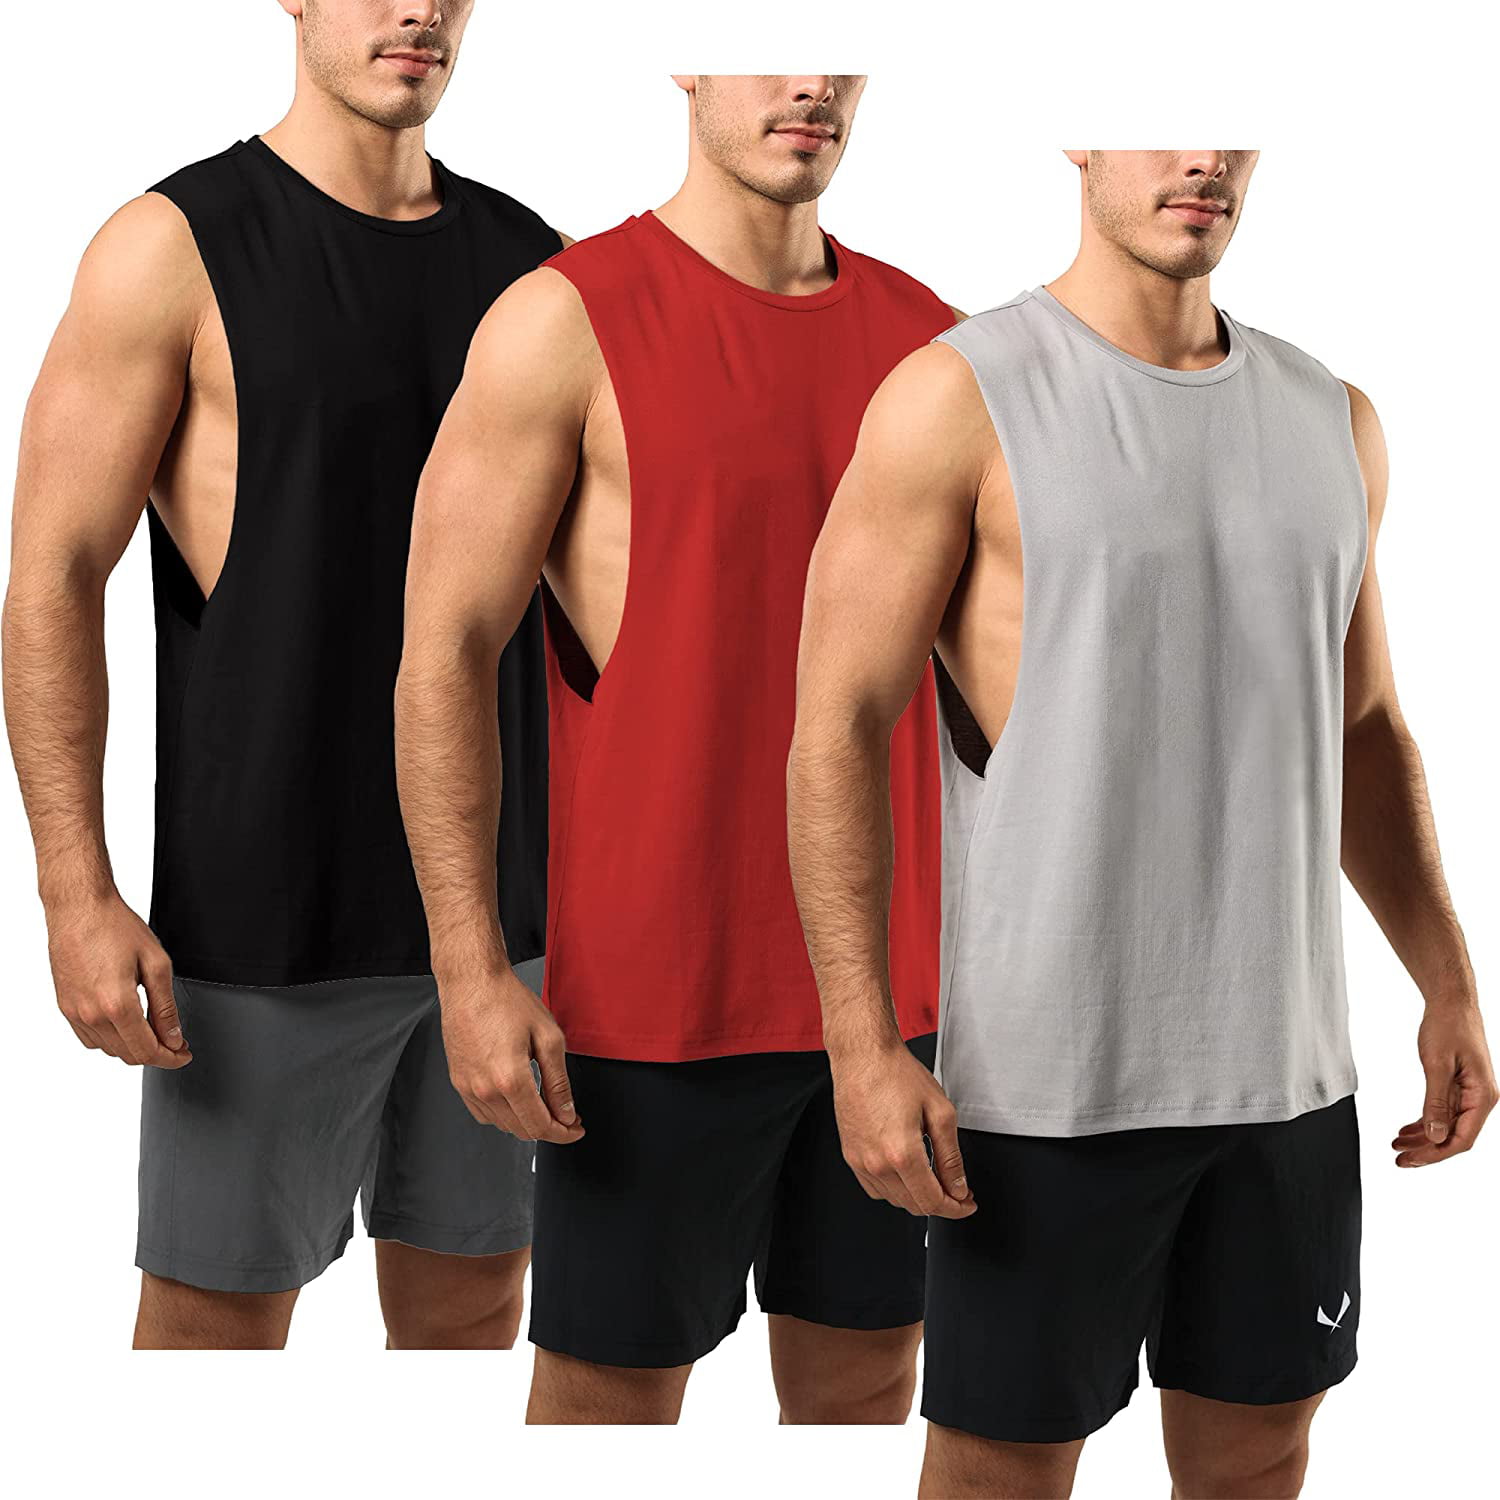 GYM REVOLUTION Men's Athletic Gym Muscle Tank Tops Workout Tank Shirts Bodybuilding Fitness Sleeveless Shirt 